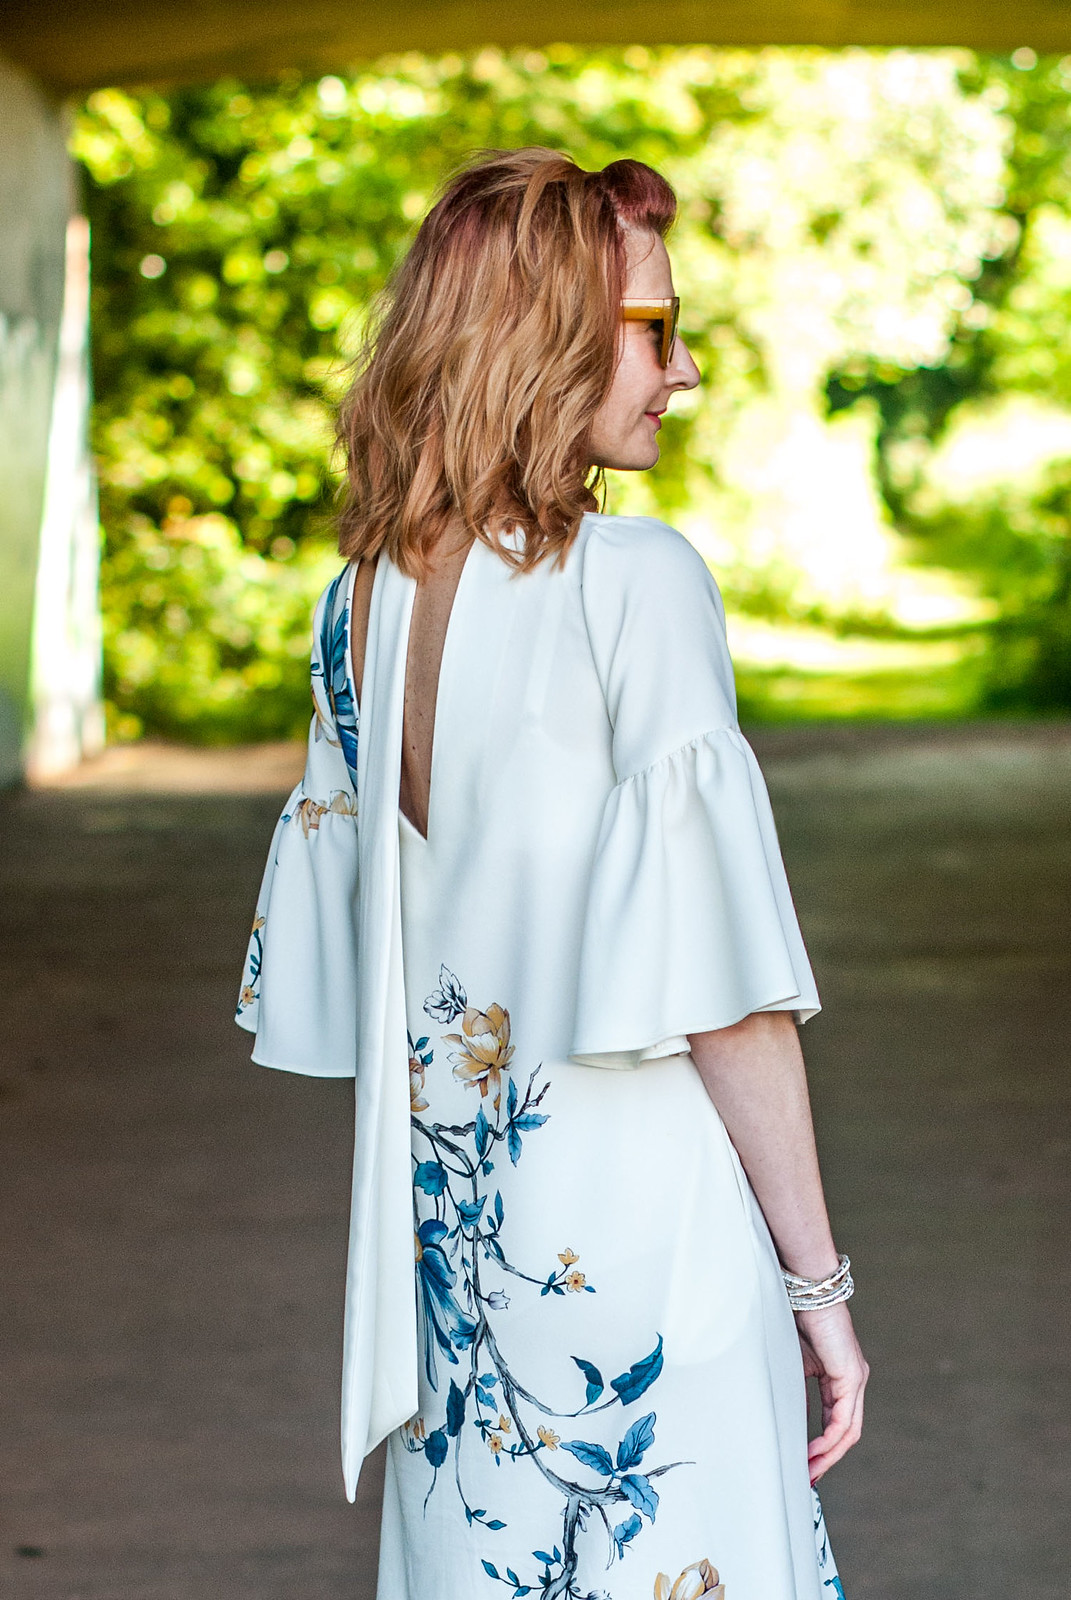 Wedding guest or garden party outfit: Marks & Spencer floral midi dress with flared sleeves nude cage heel mules pearl sunglasses | Not Dressed As Lamb, over 40 style